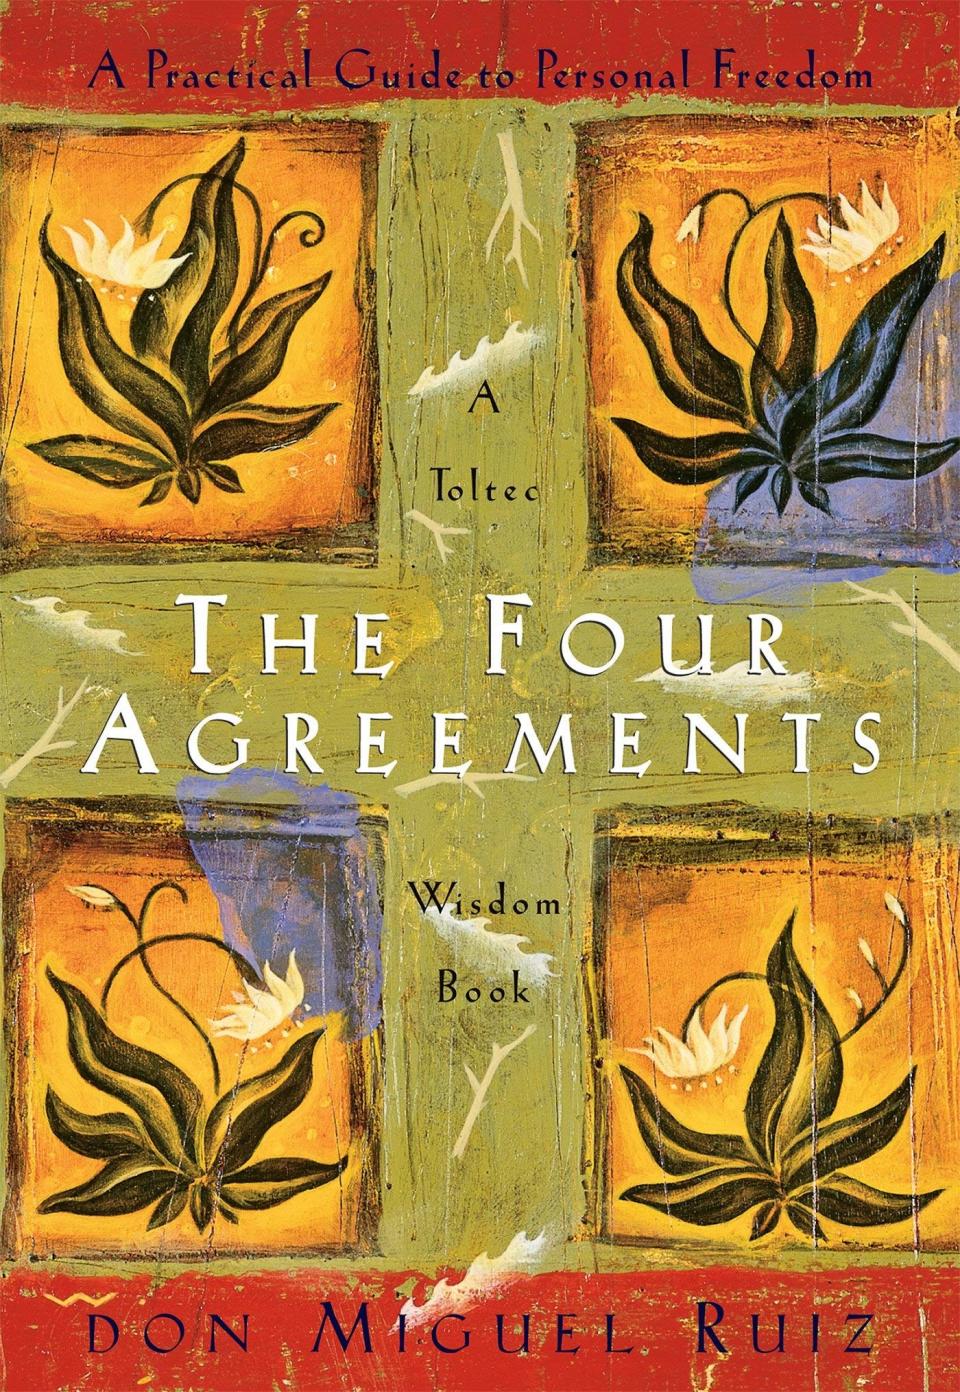 The Four Agreements, which talks about the agreements that you can implement to disqualify your own judgments, helps you avoid thought and behavior patterns that create frustration, blame, hurt feelings, and other negative emotions. This is a book of teachings that really compels people to completely change their whole system of thought.